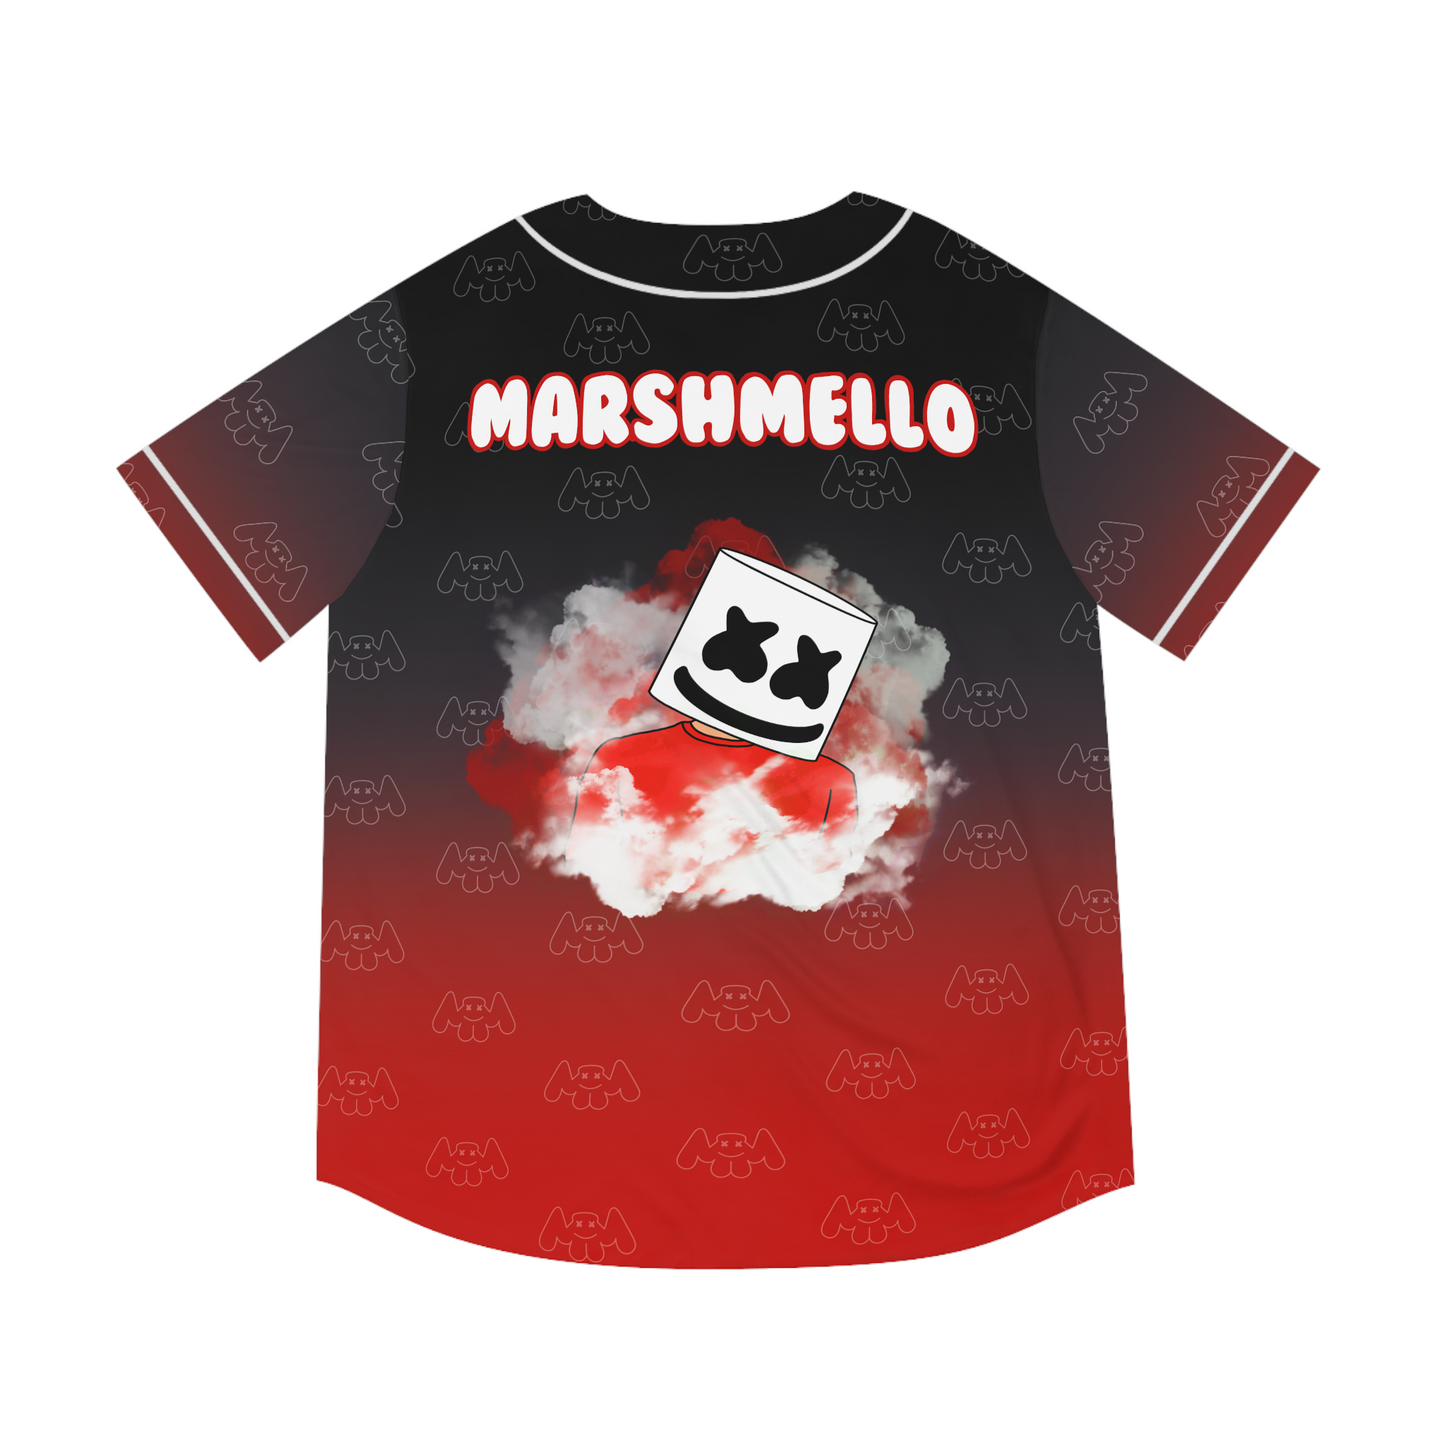 Marshmello Jersey (Black/Red Ombre)